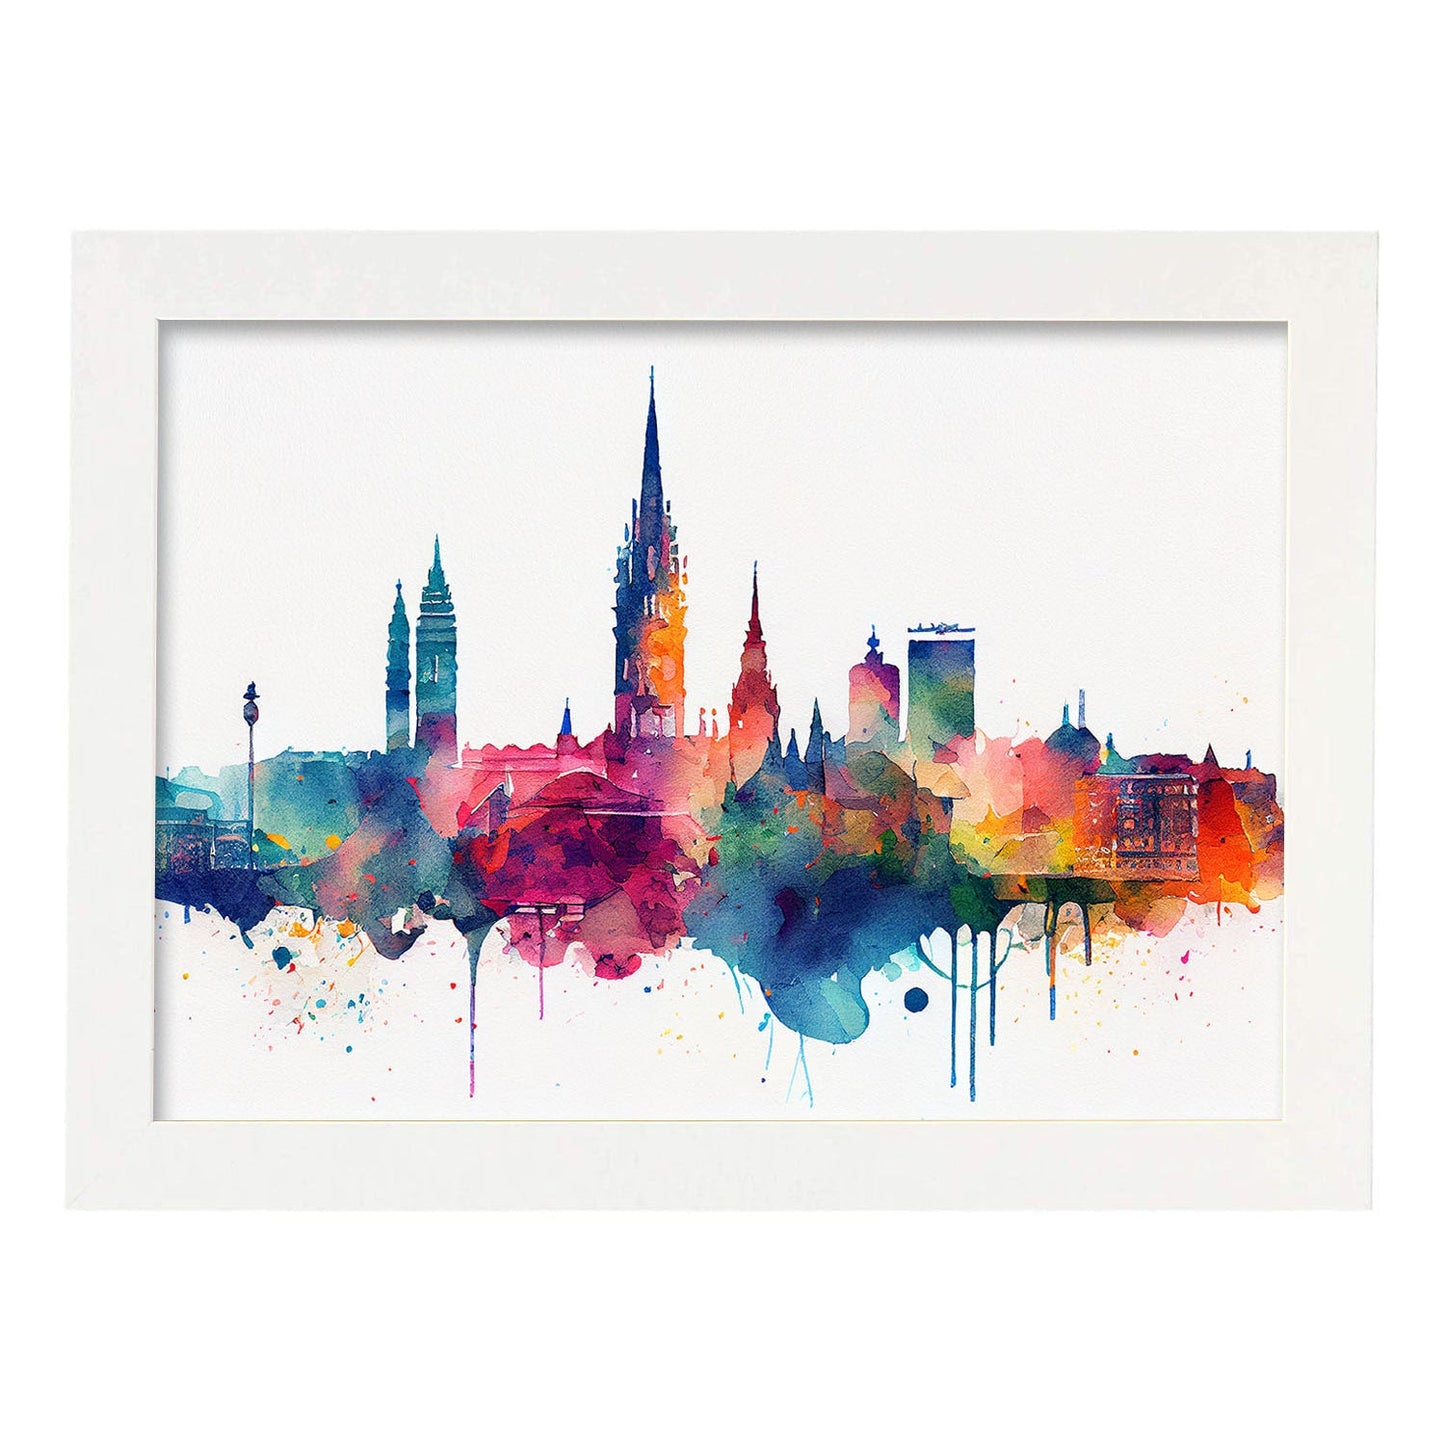 Nacnic watercolor of a skyline of the city of Brussels. Aesthetic Wall Art Prints for Bedroom or Living Room Design.-Artwork-Nacnic-A4-Marco Blanco-Nacnic Estudio SL